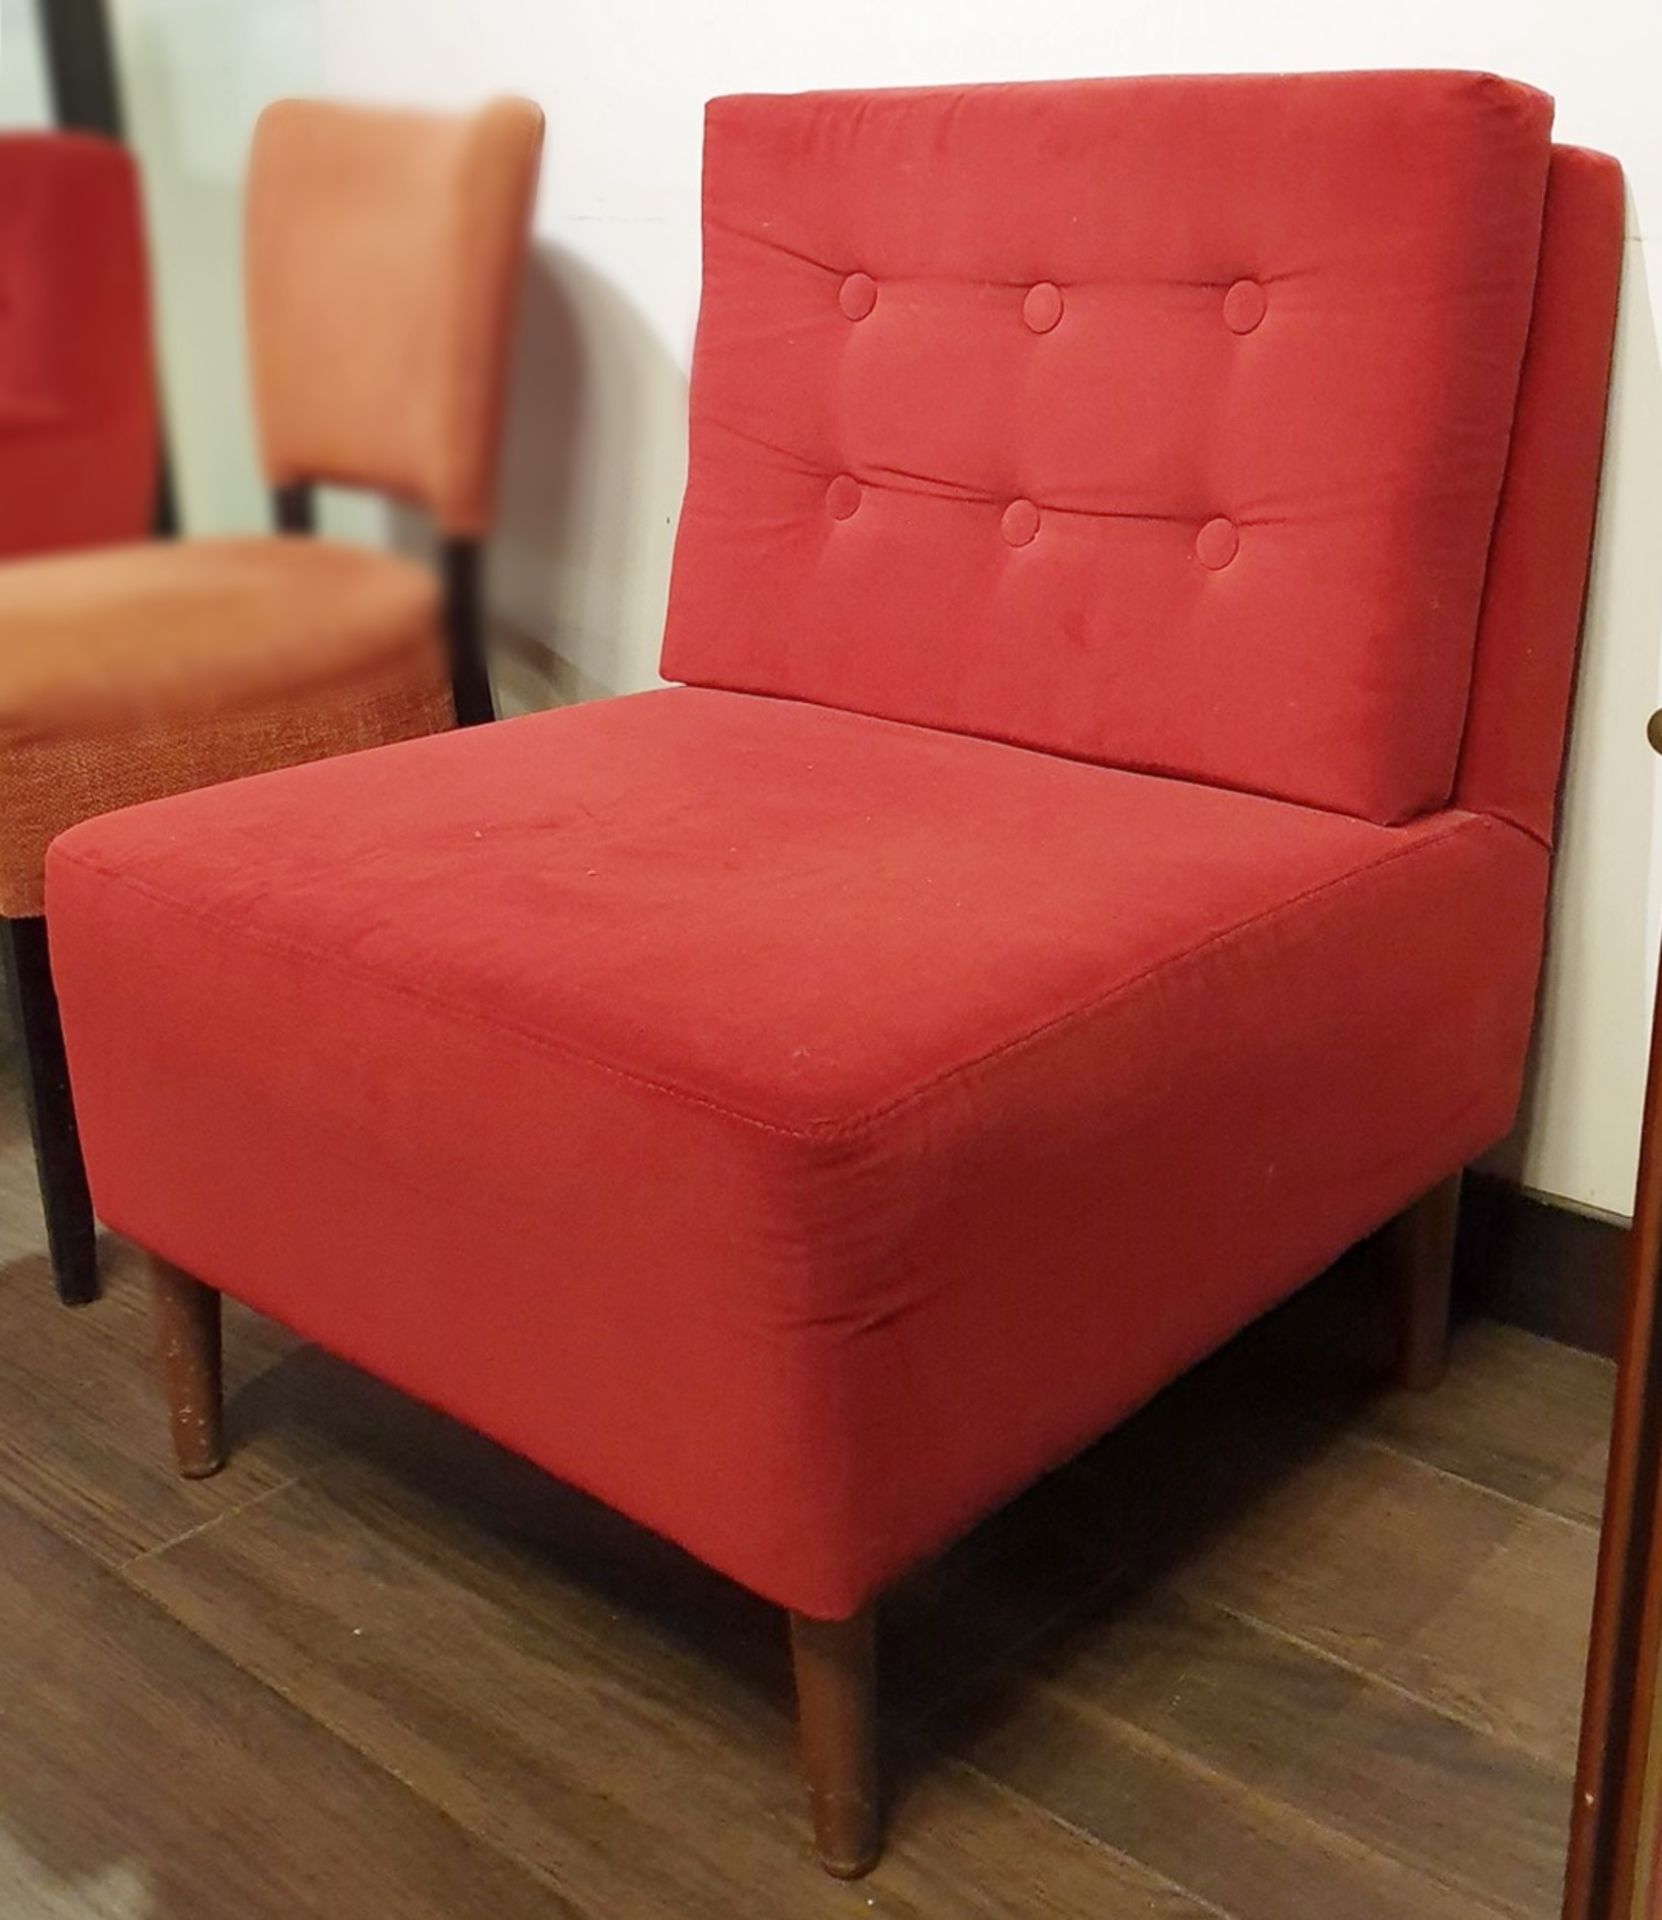 1 x Button Back Modular Chair in Red Fabric - H44/80 x W67 x D70 cms - Ref PA157 - CL463 - Location: